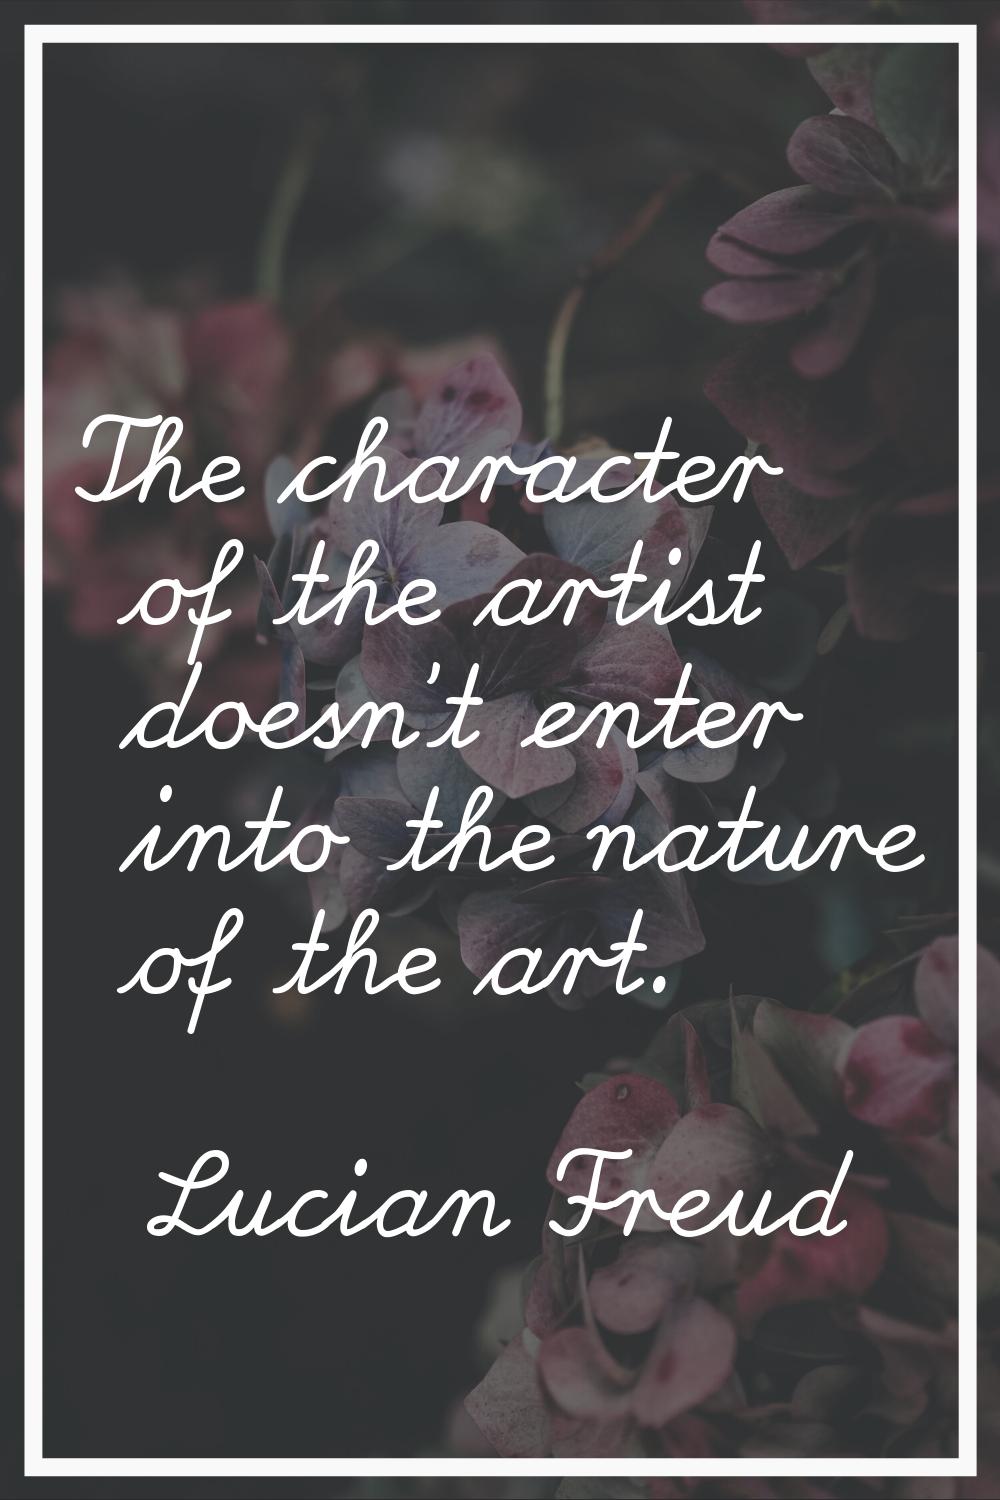 The character of the artist doesn't enter into the nature of the art.